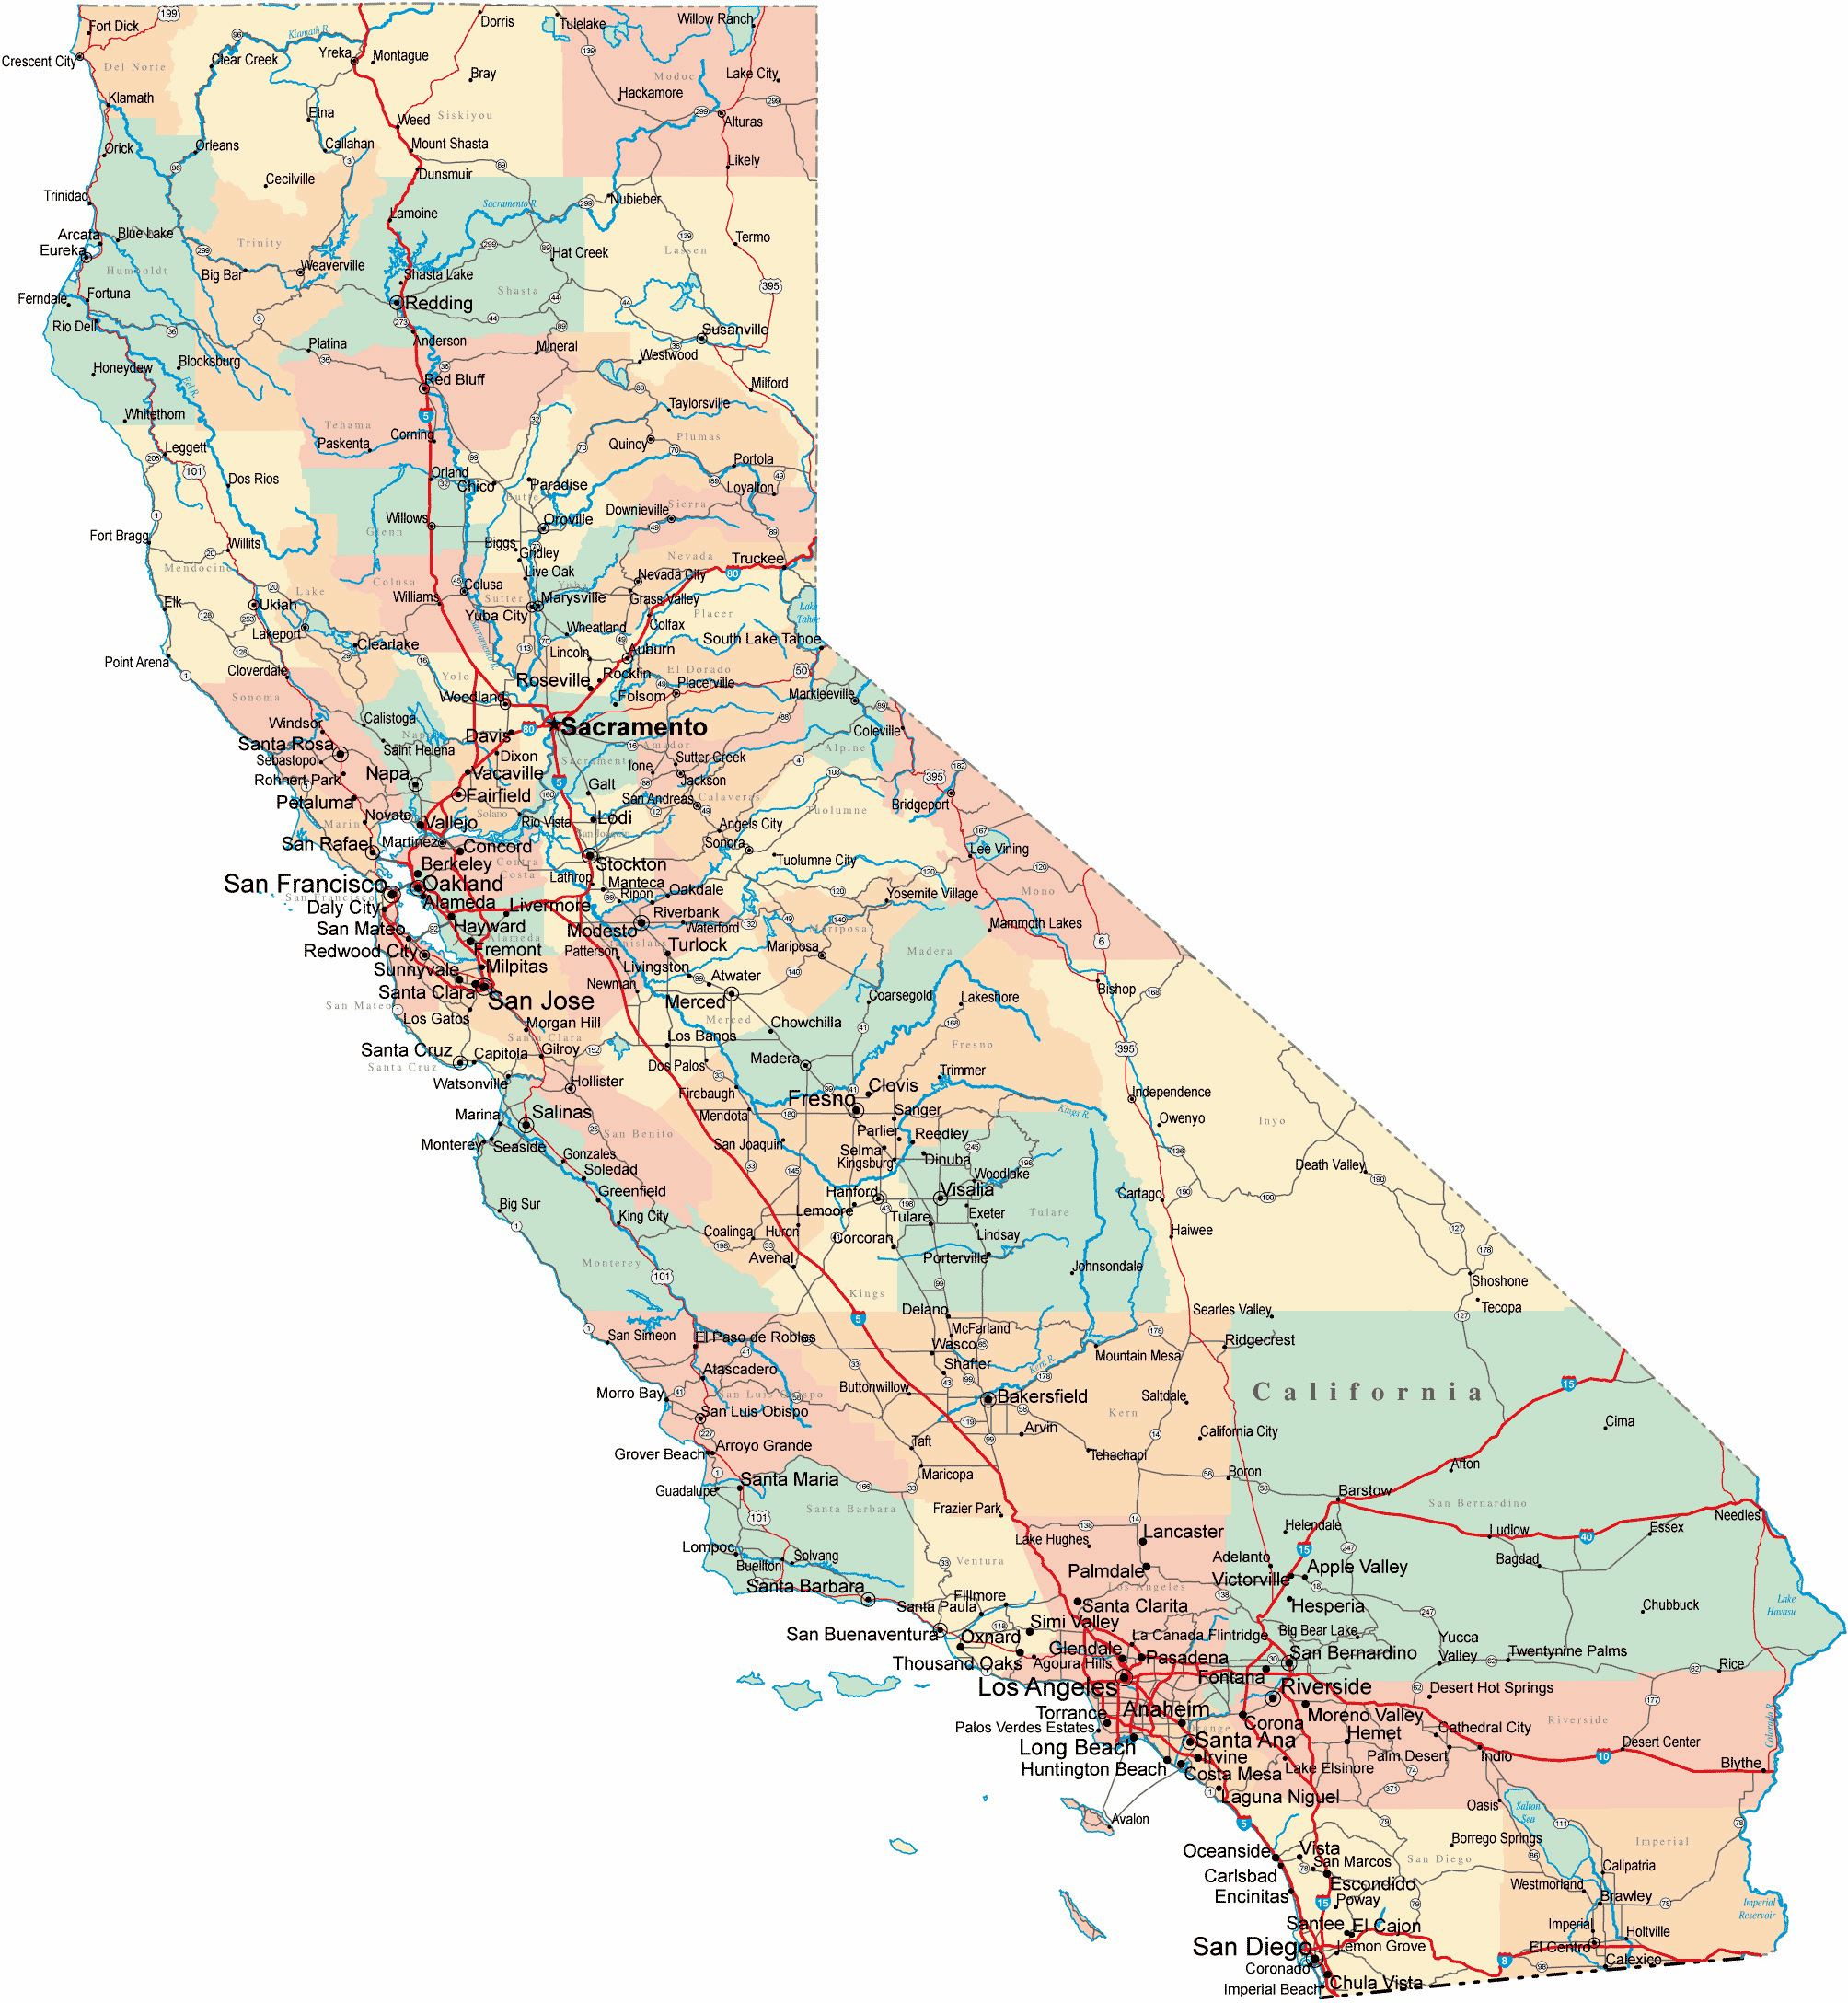 Large California Maps For Free Download And Print | High-Resolution - California Interstate Highway Map